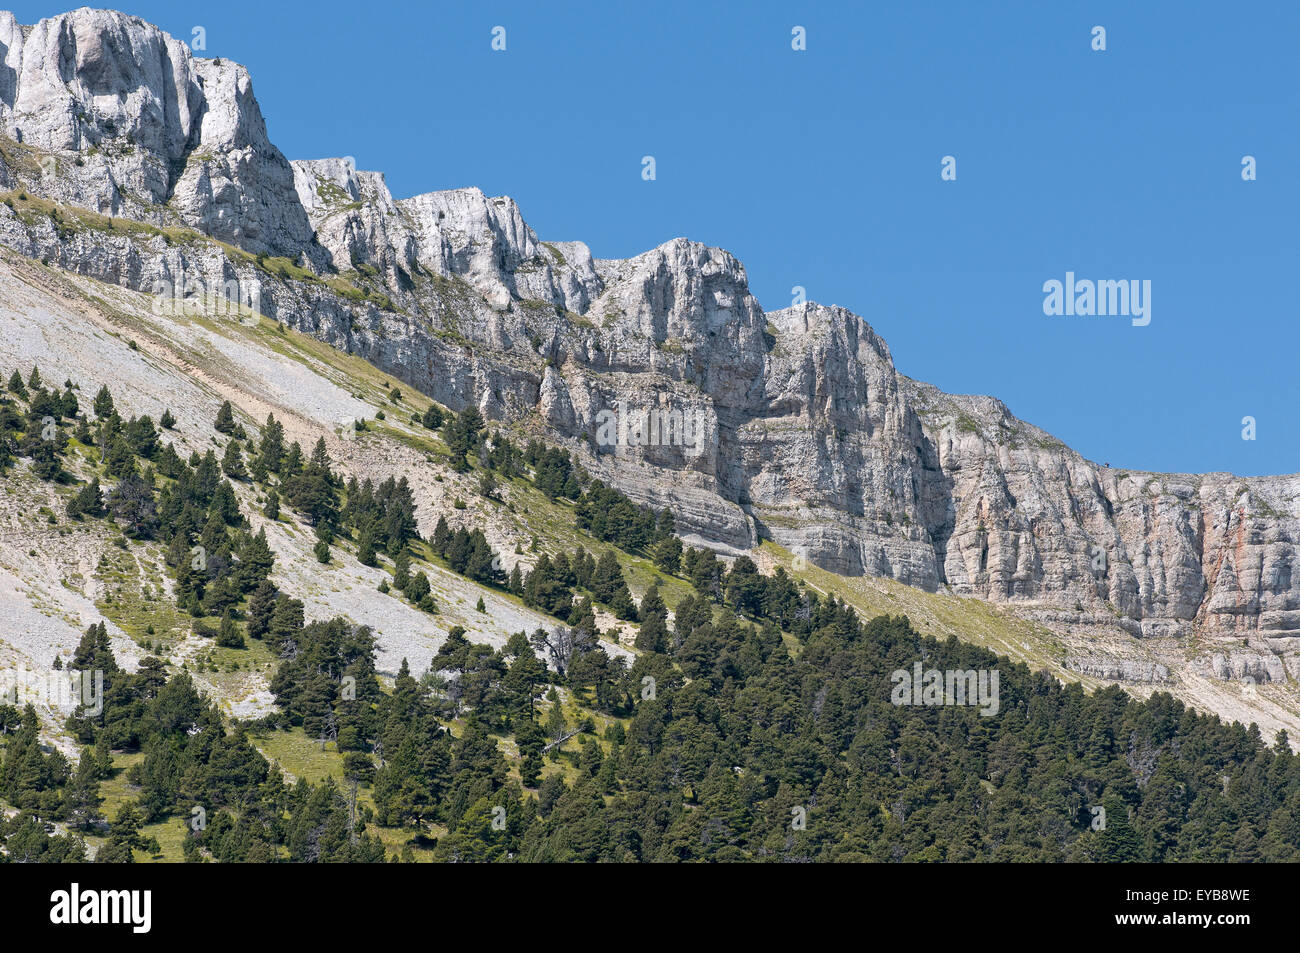 Silver fir forest in the Buech Valley. Vercors Regional Park. Isere. French Alps. France Stock Photo